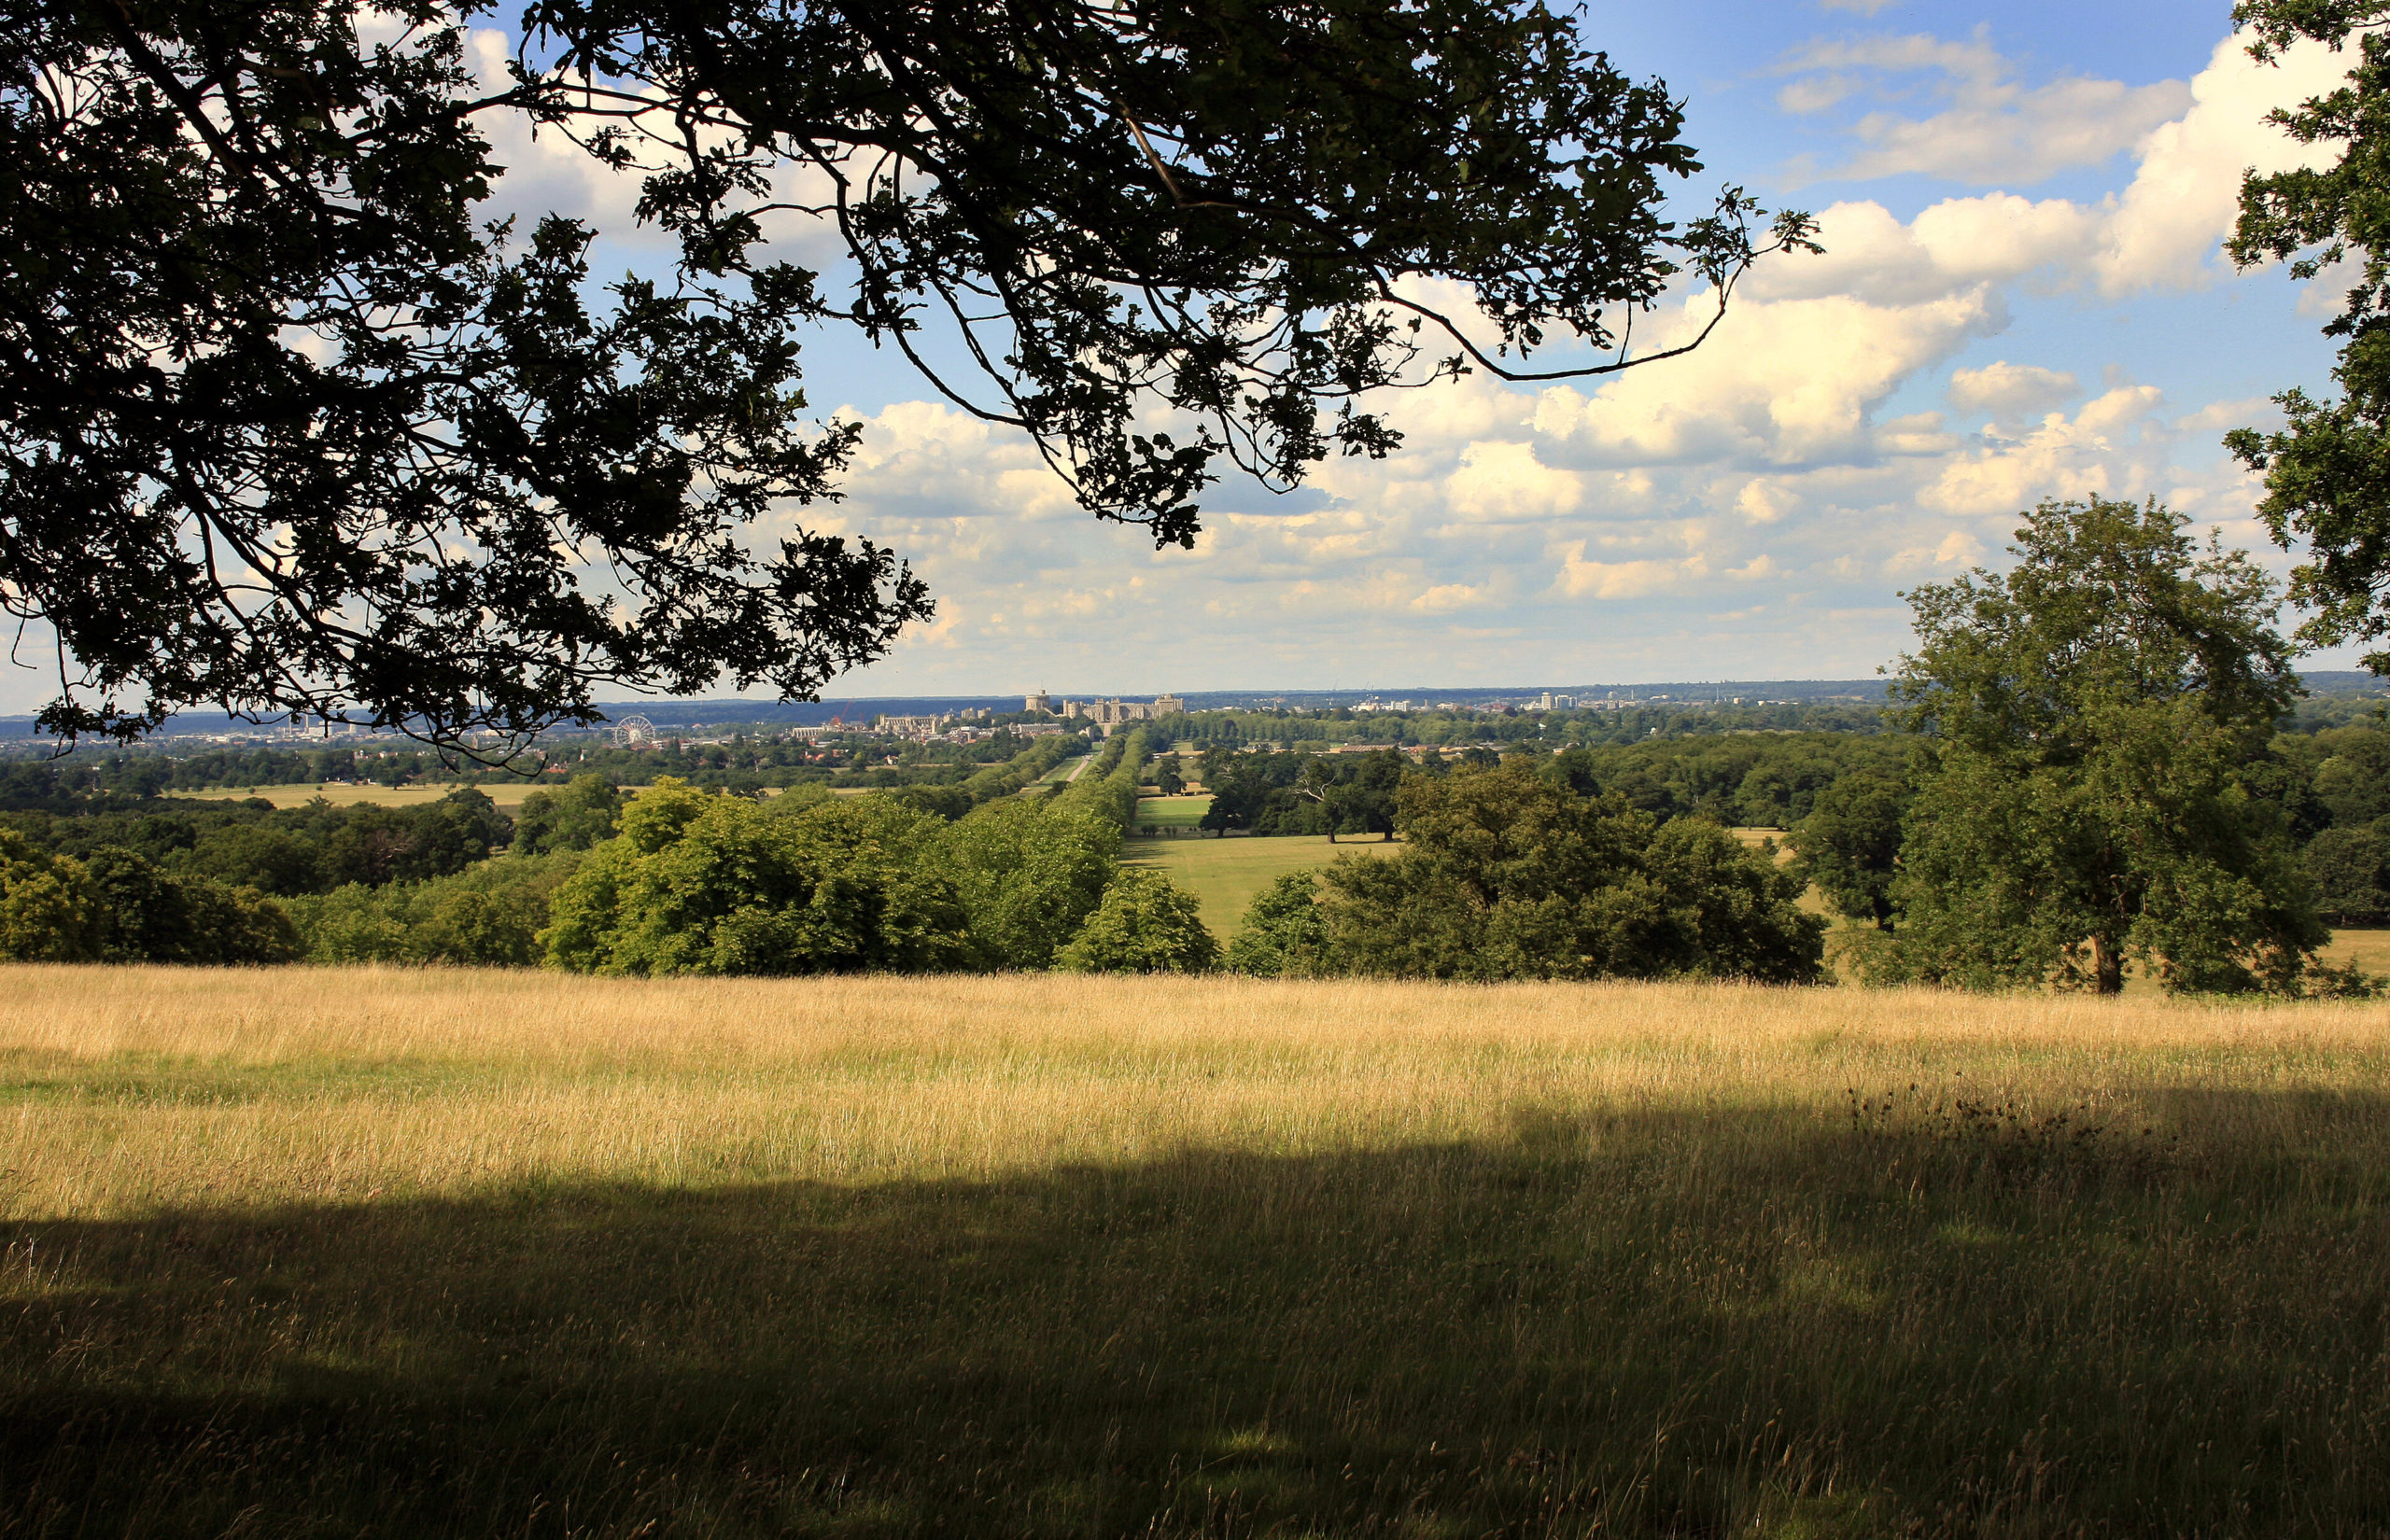 Windsor Great Park with Windsor Castle in the background.